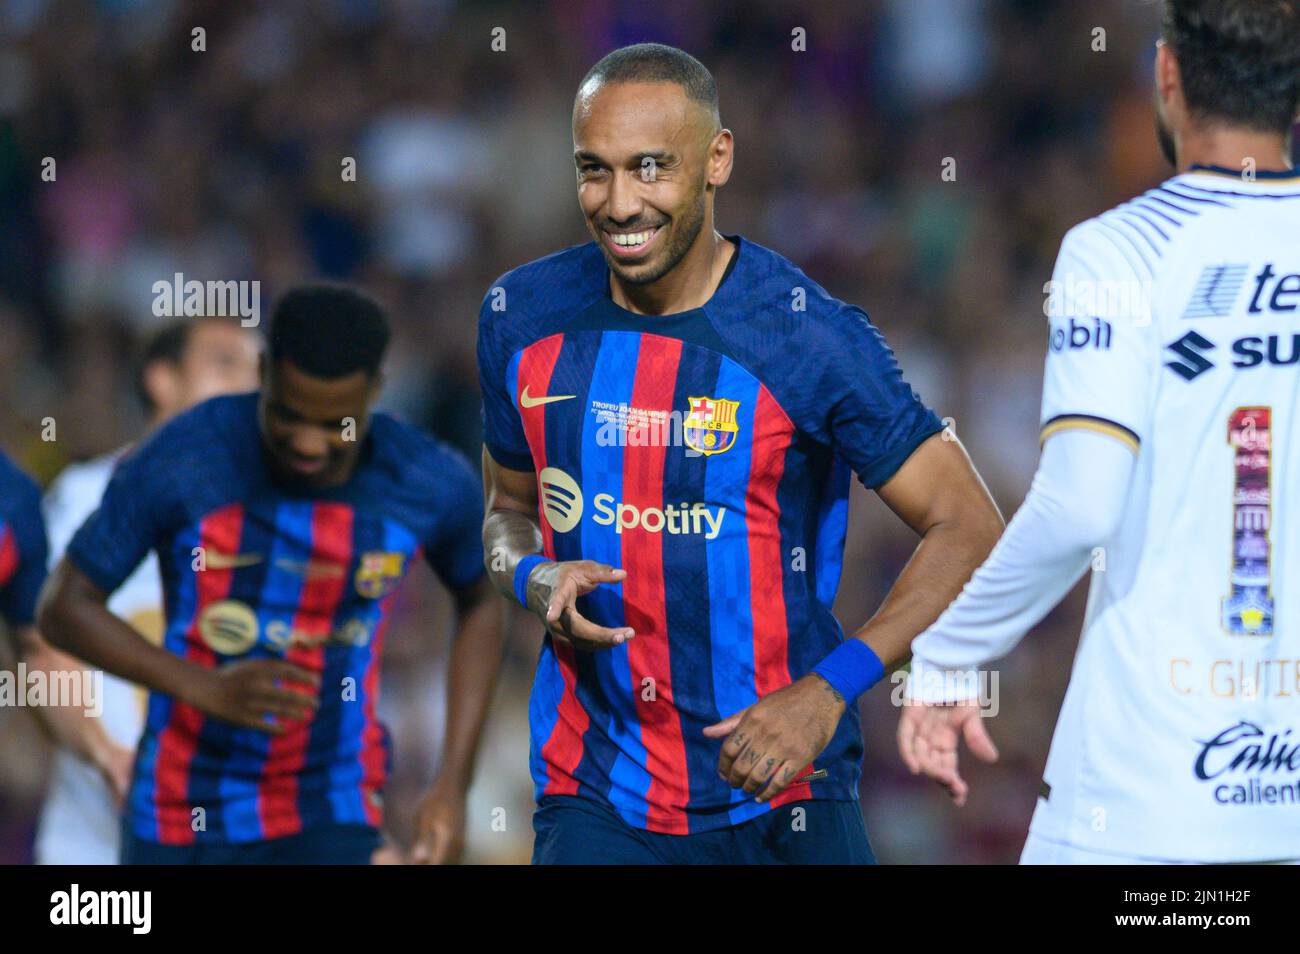 Pierre-Emerick Aubameyang of FC Barcelona celebrate a goal during the Joan Gamper Trophy match between FC Barcelona and Pumas UNAM at Camp Nou in Barcelona, Spain. Stock Photo